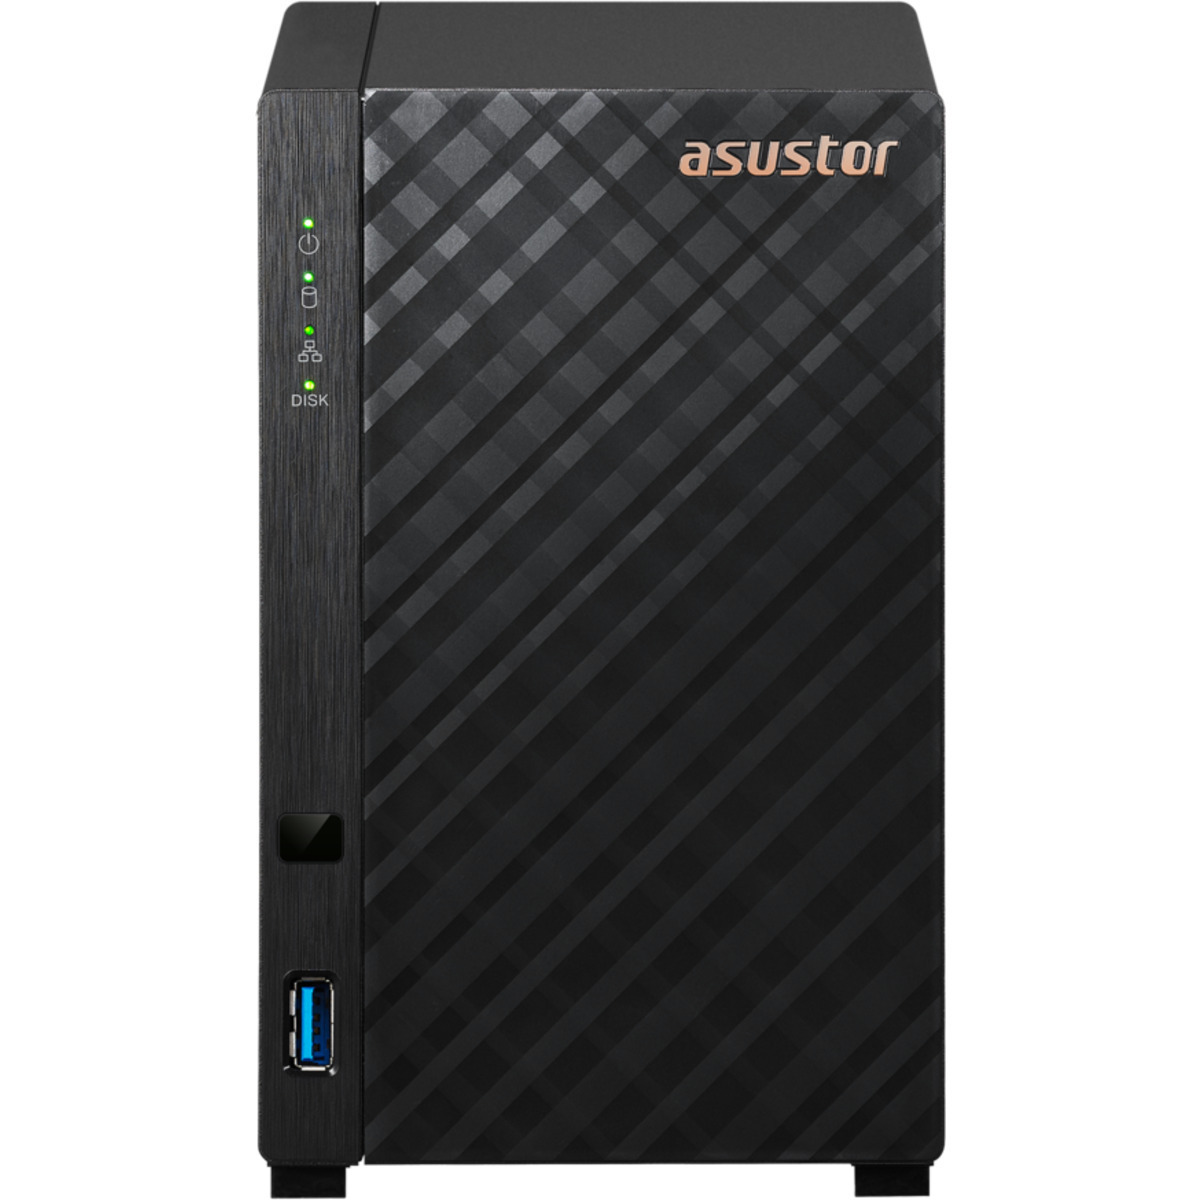 ASUSTOR DRIVESTOR 2 Lite AS1102TL 16tb 2-Bay Desktop Personal / Basic Home / Small Office NAS - Network Attached Storage Device 2x8tb Seagate IronWolf Pro ST8000NT001 3.5 7200rpm SATA 6Gb/s HDD NAS Class Drives Installed - Burn-In Tested - ON SALE DRIVESTOR 2 Lite AS1102TL